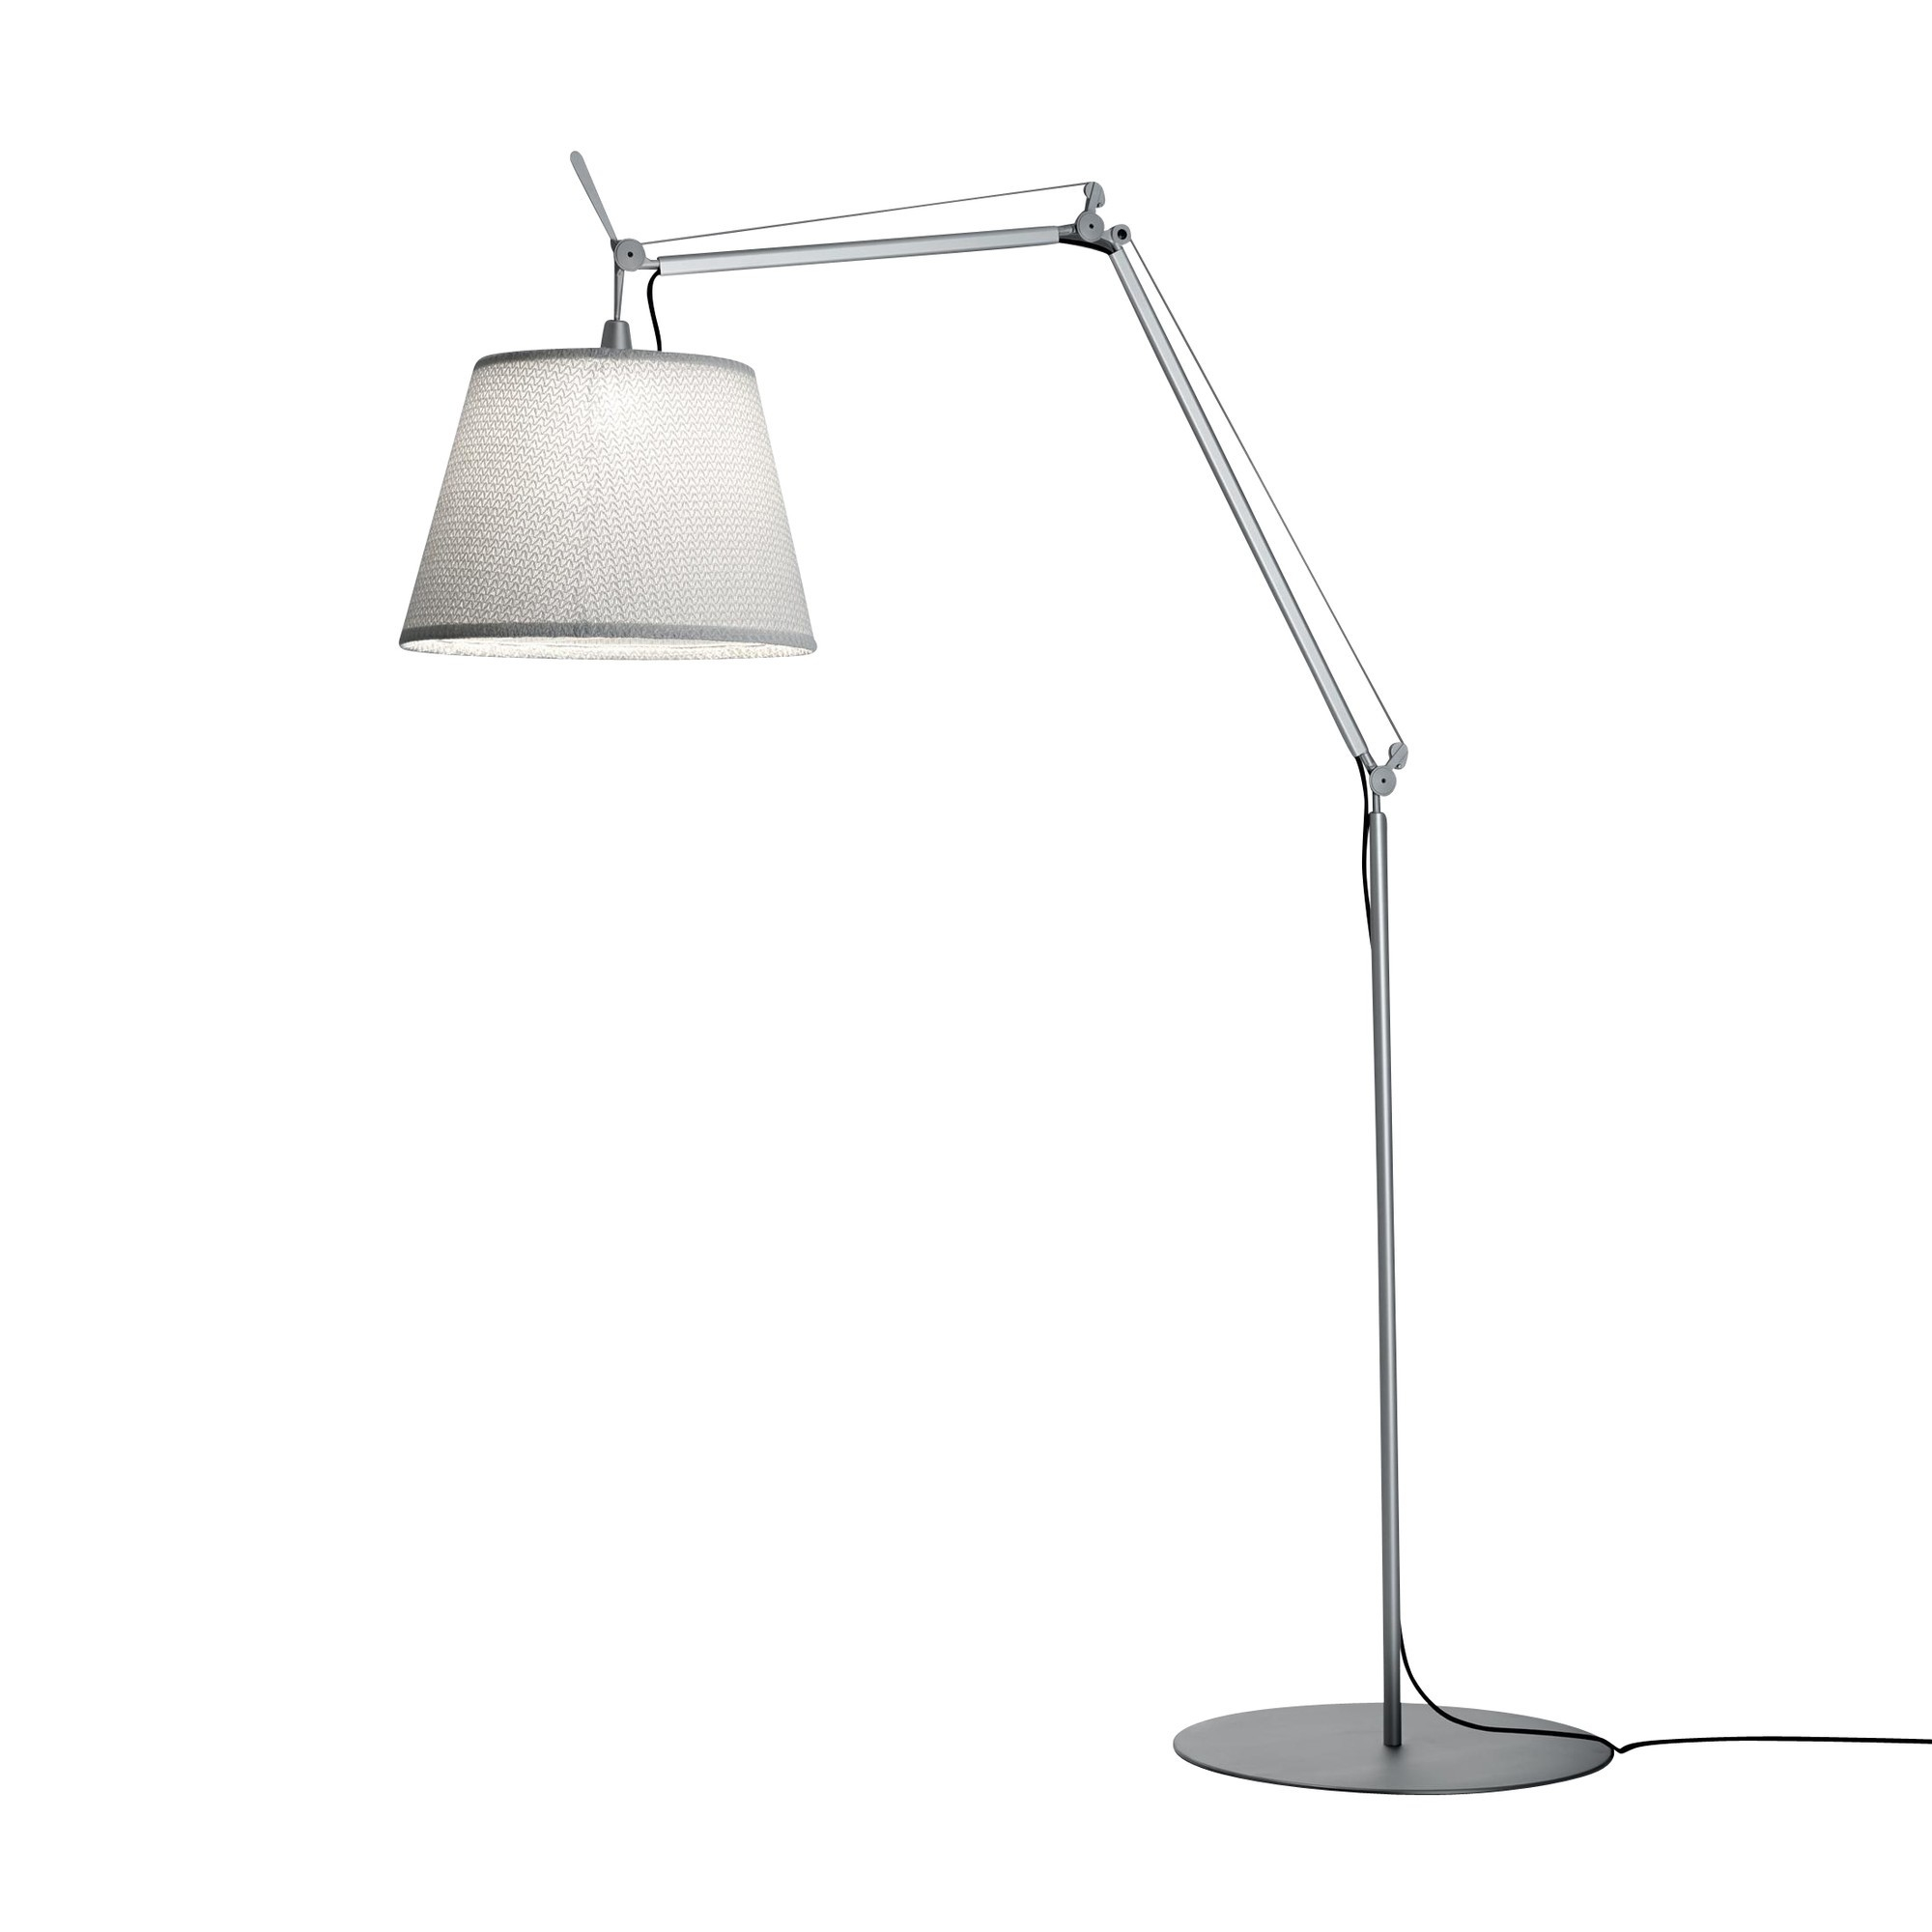 Tolomeo Paralume Led Outdoor Floor Lamp in size 2000 X 2000